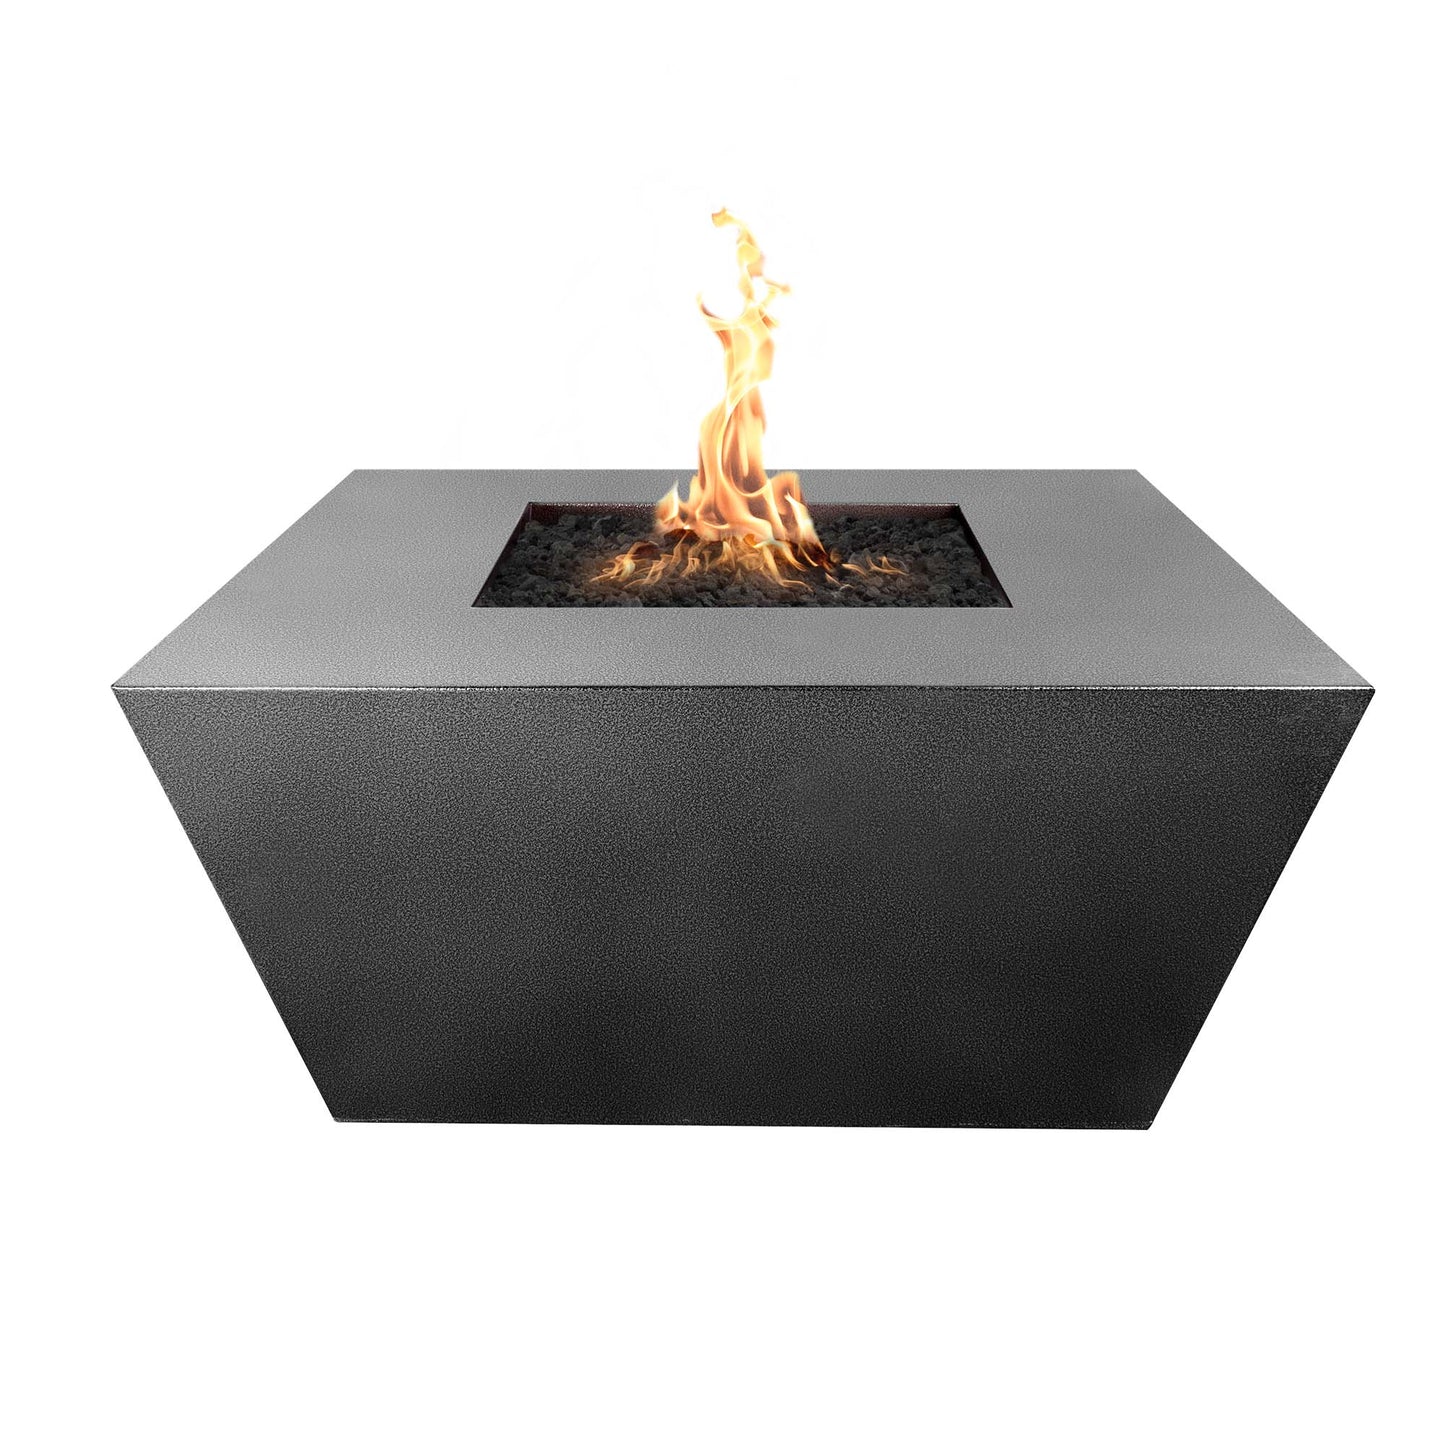 The Outdoor Plus Square Redan 36" Stainless Steel Liquid Propane Fire Pit with 110V Electronic Ignition